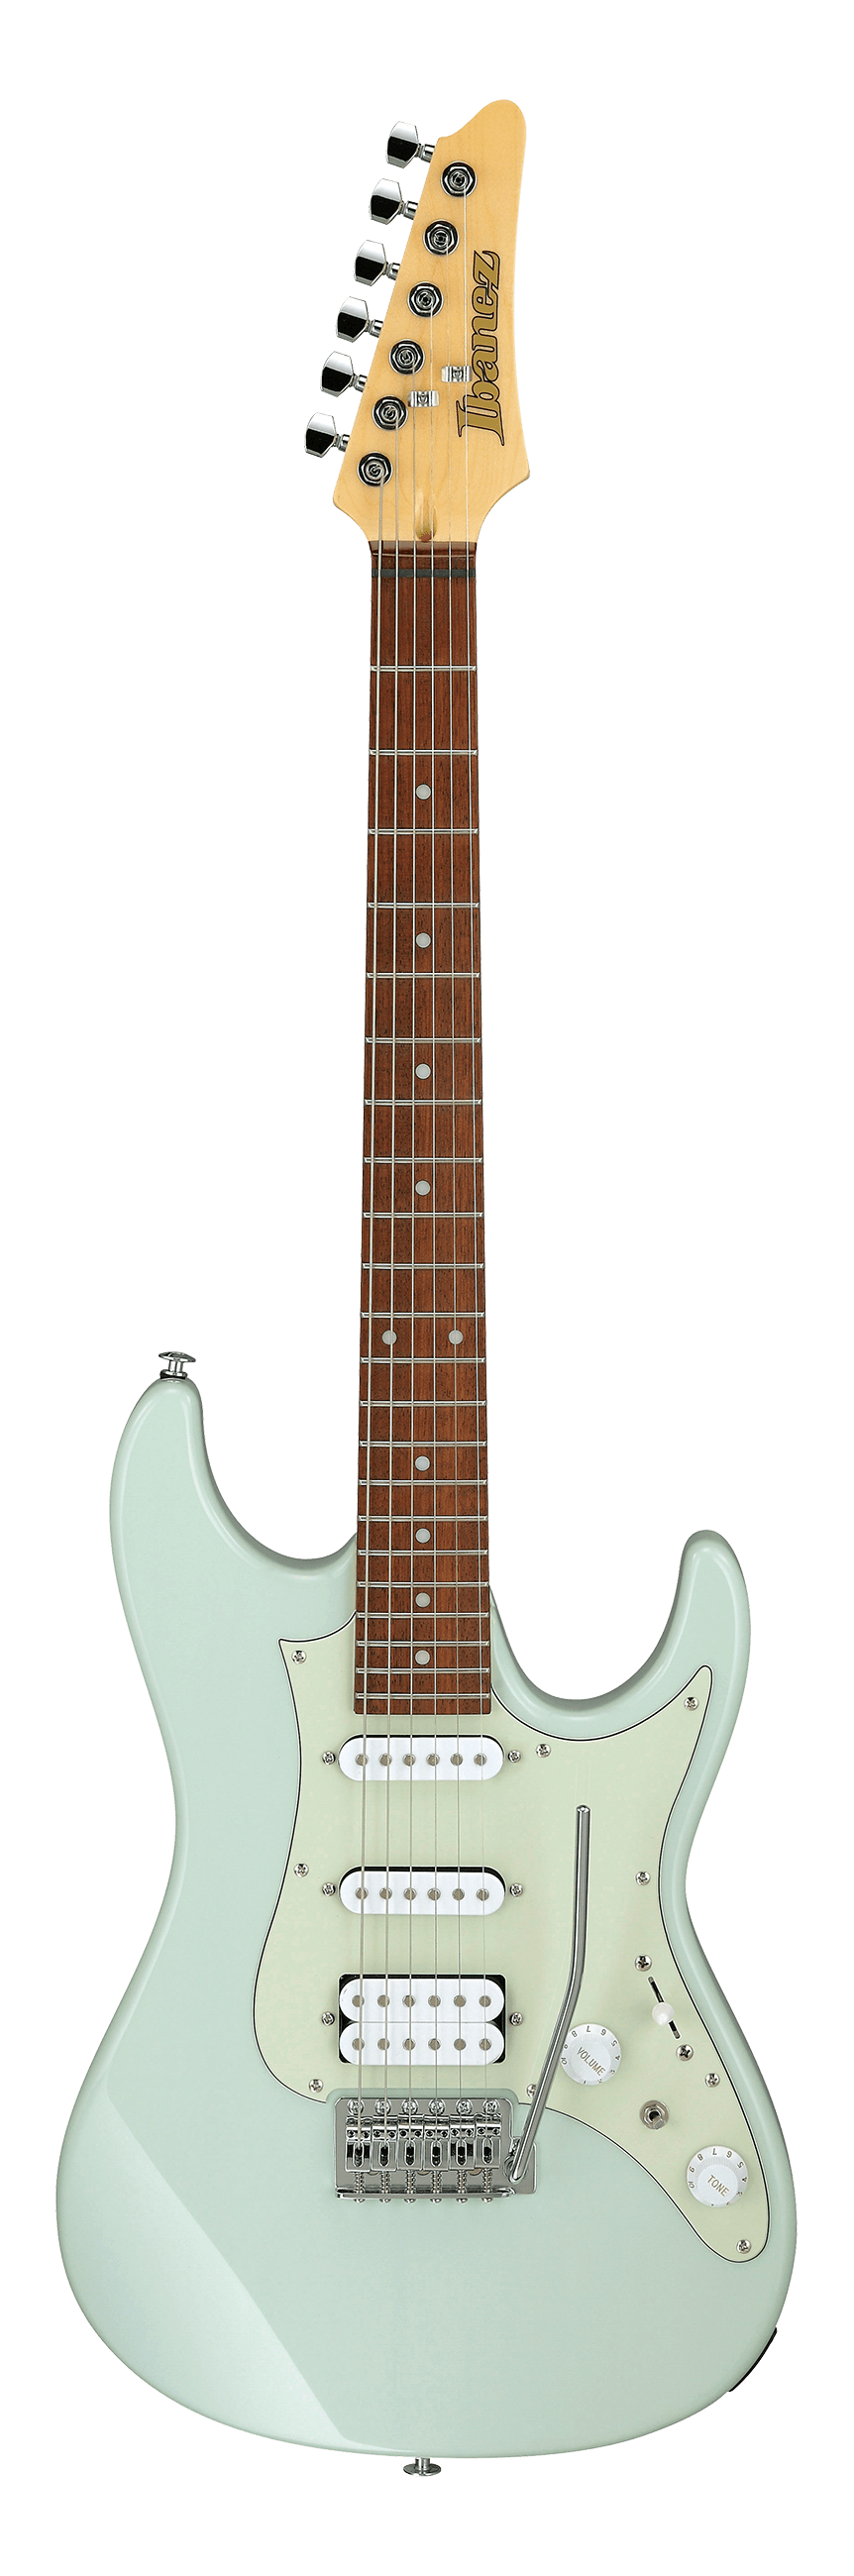 Ibanez AZES40 Electric Guitar - Mint Green, IBANEZ, ELECTRIC GUITAR, ibanez-electric-guitar-azes40-mgr, ZOSO MUSIC SDN BHD